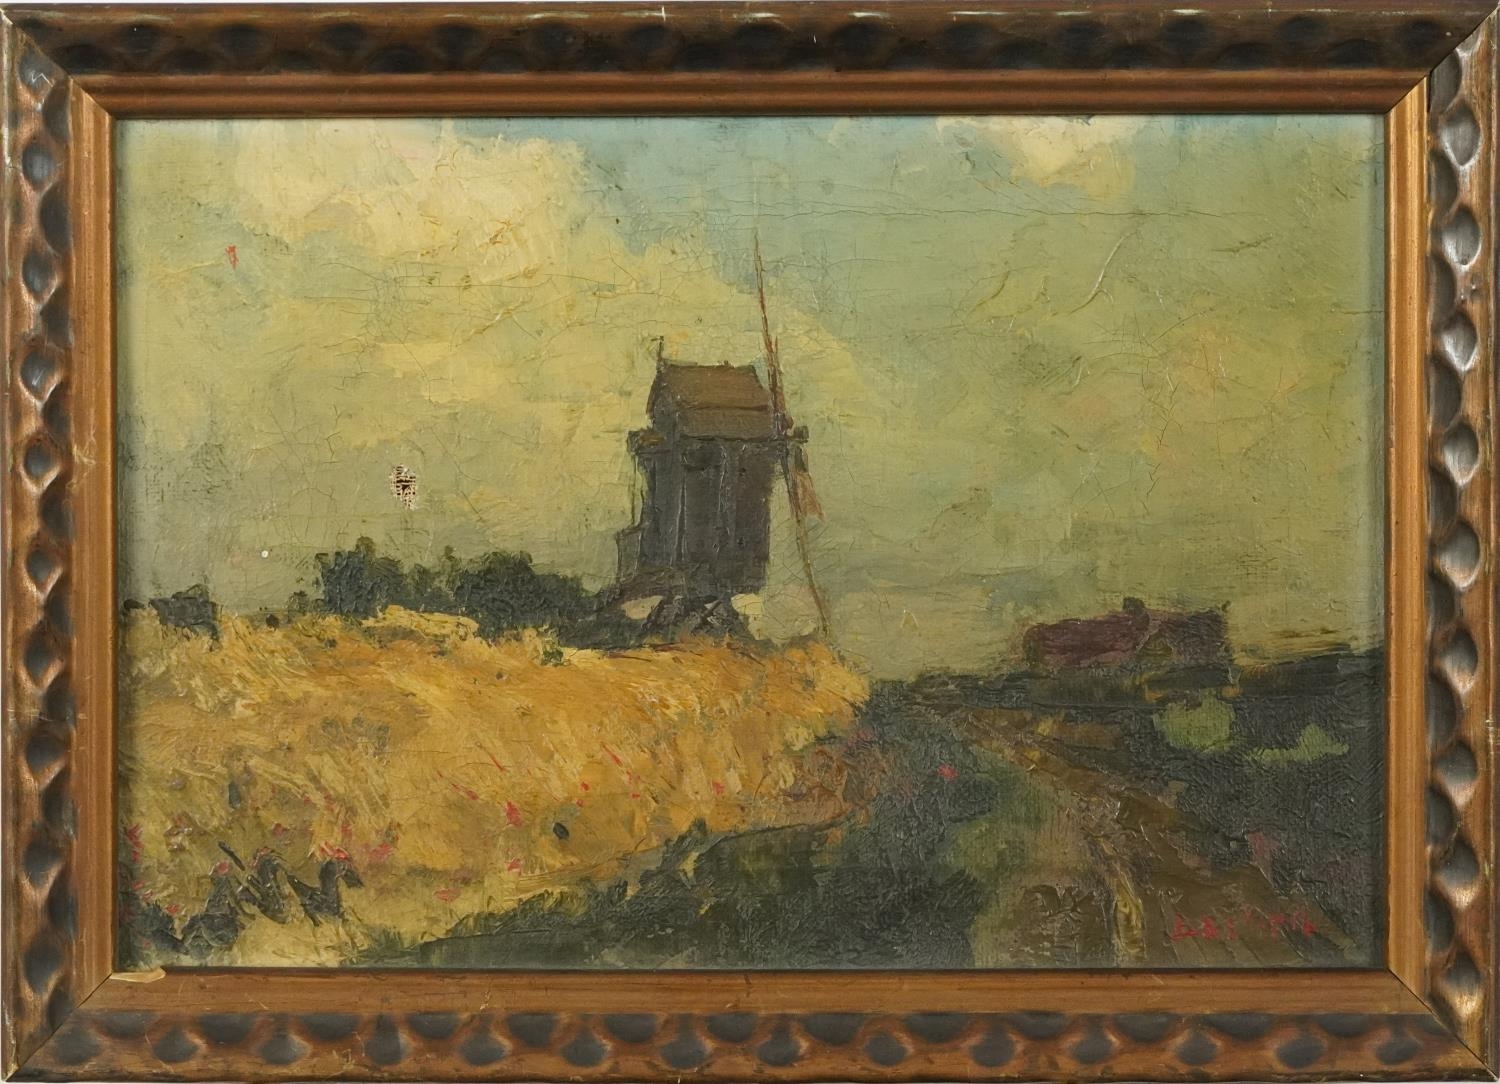 Landscape with windmill, 19th century European Impressionist oil on canvas bearing an indistinct - Image 3 of 8